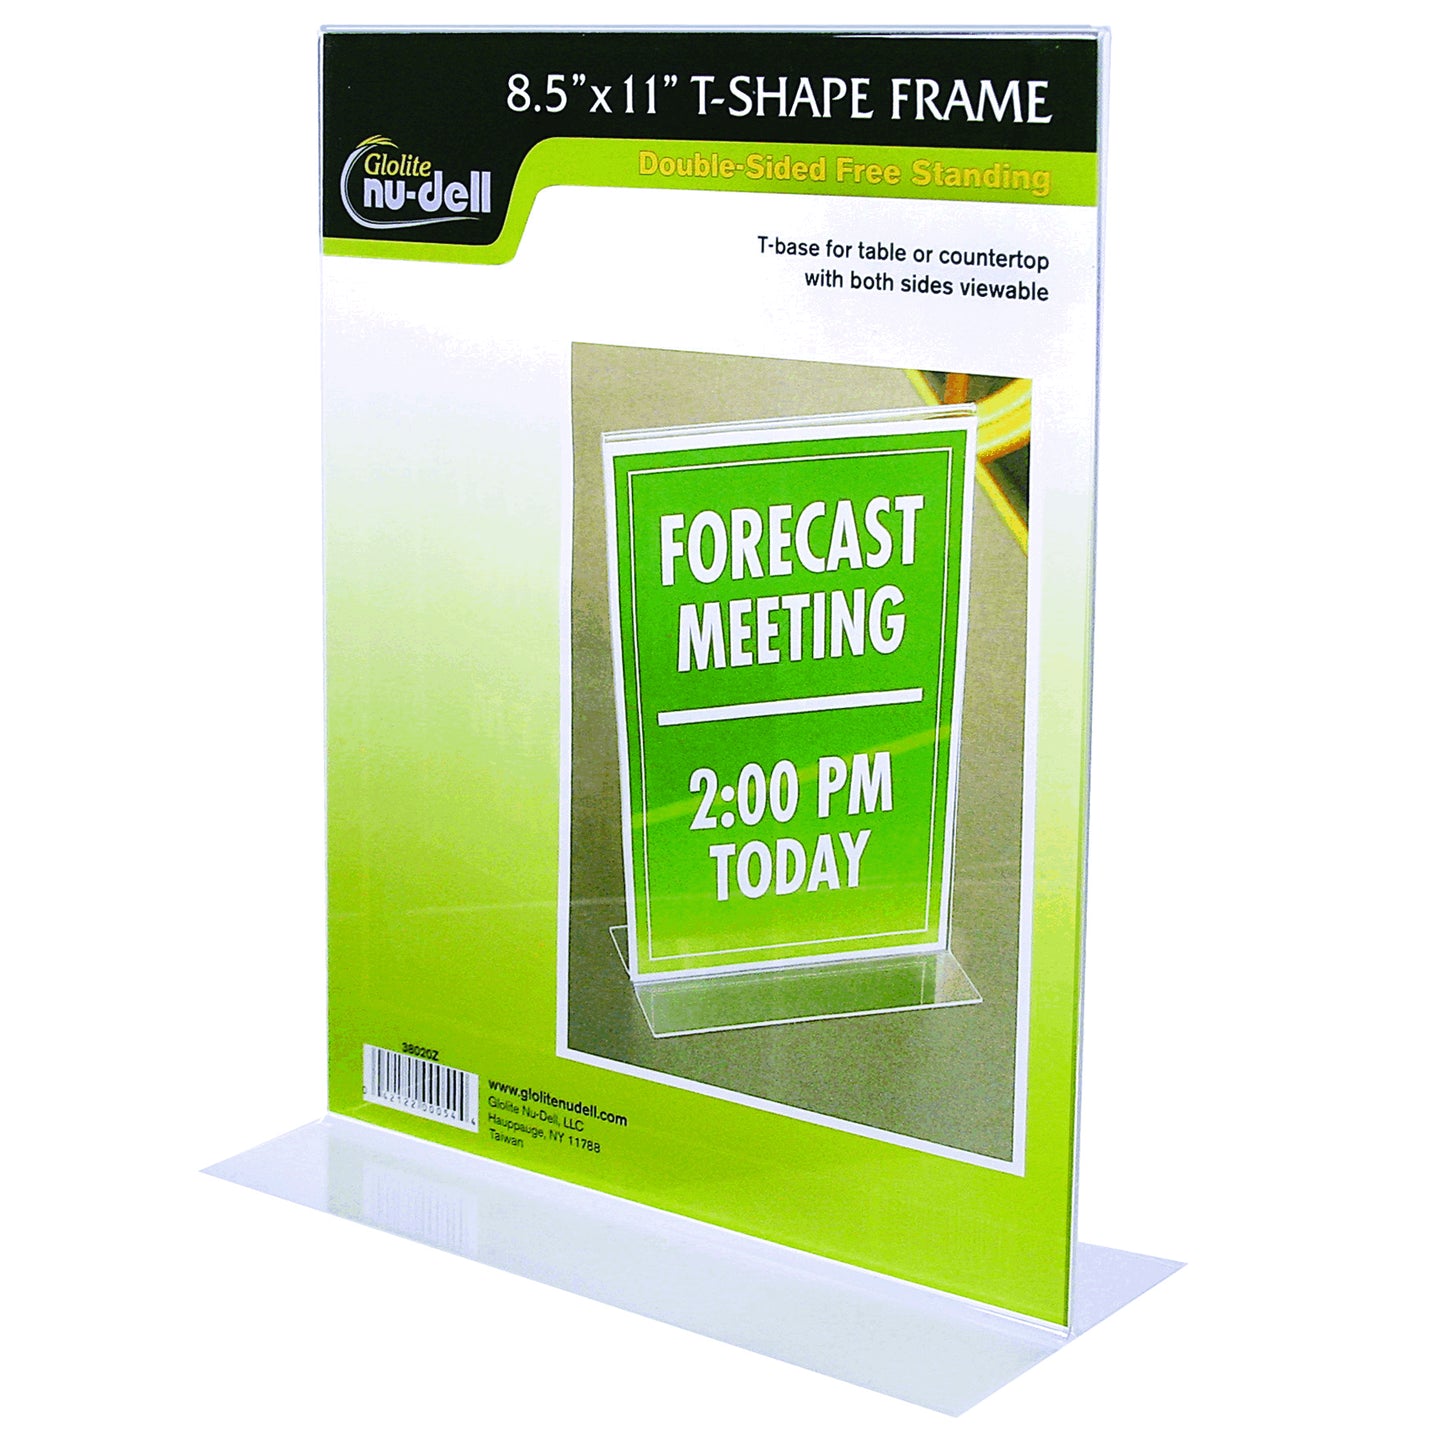 Table Top Double Sided T-Base Freestanding Sign Display Frame, 8.5" x 11"